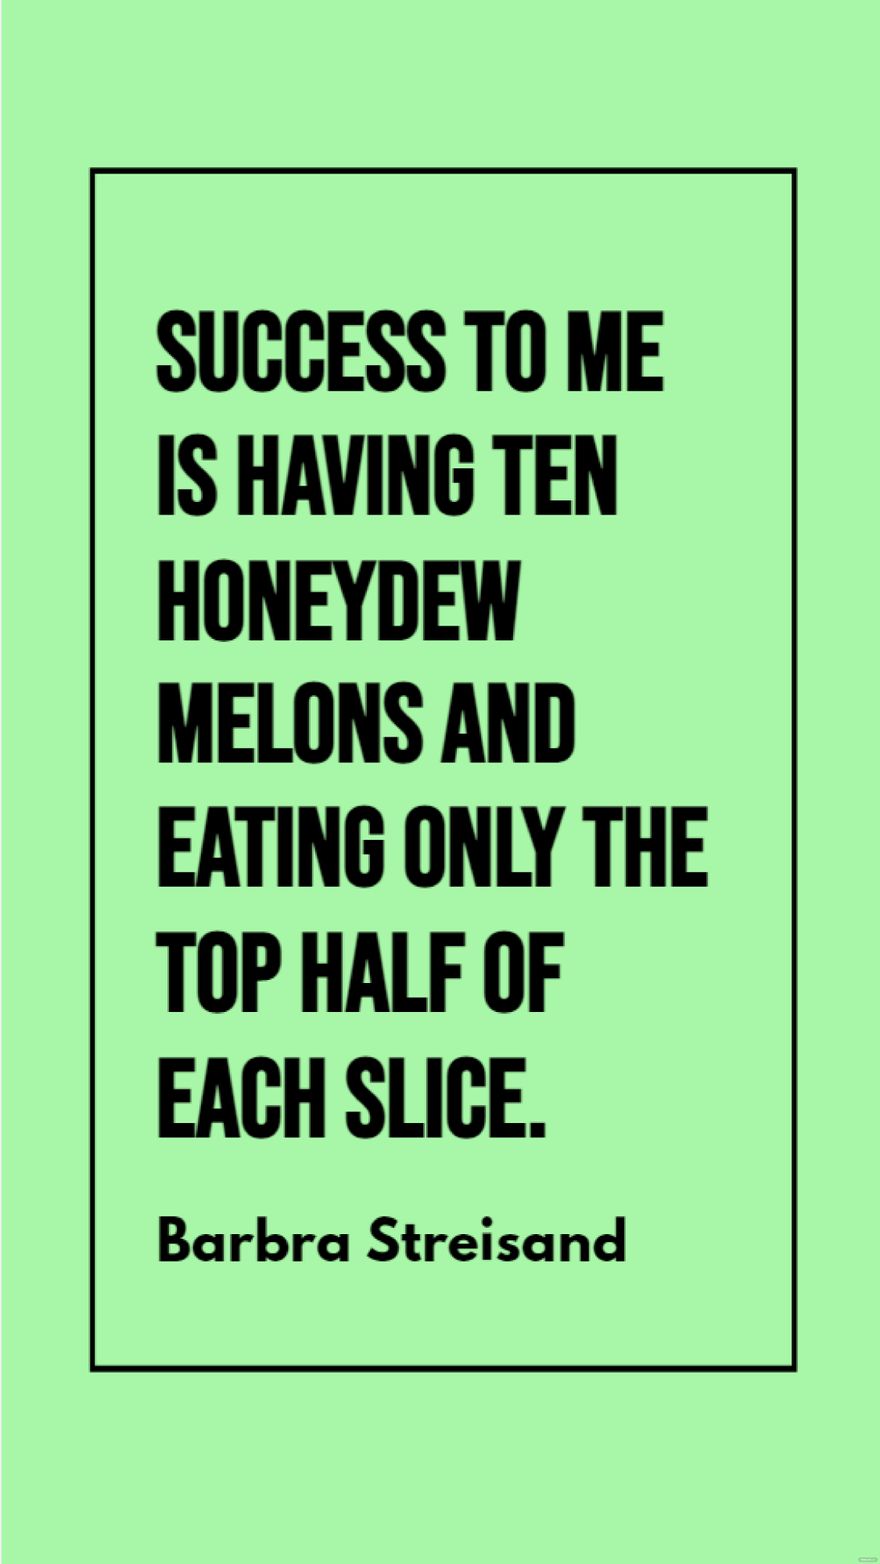 Barbra Streisand - Success to me is having ten honeydew melons and eating only the top half of each slice.